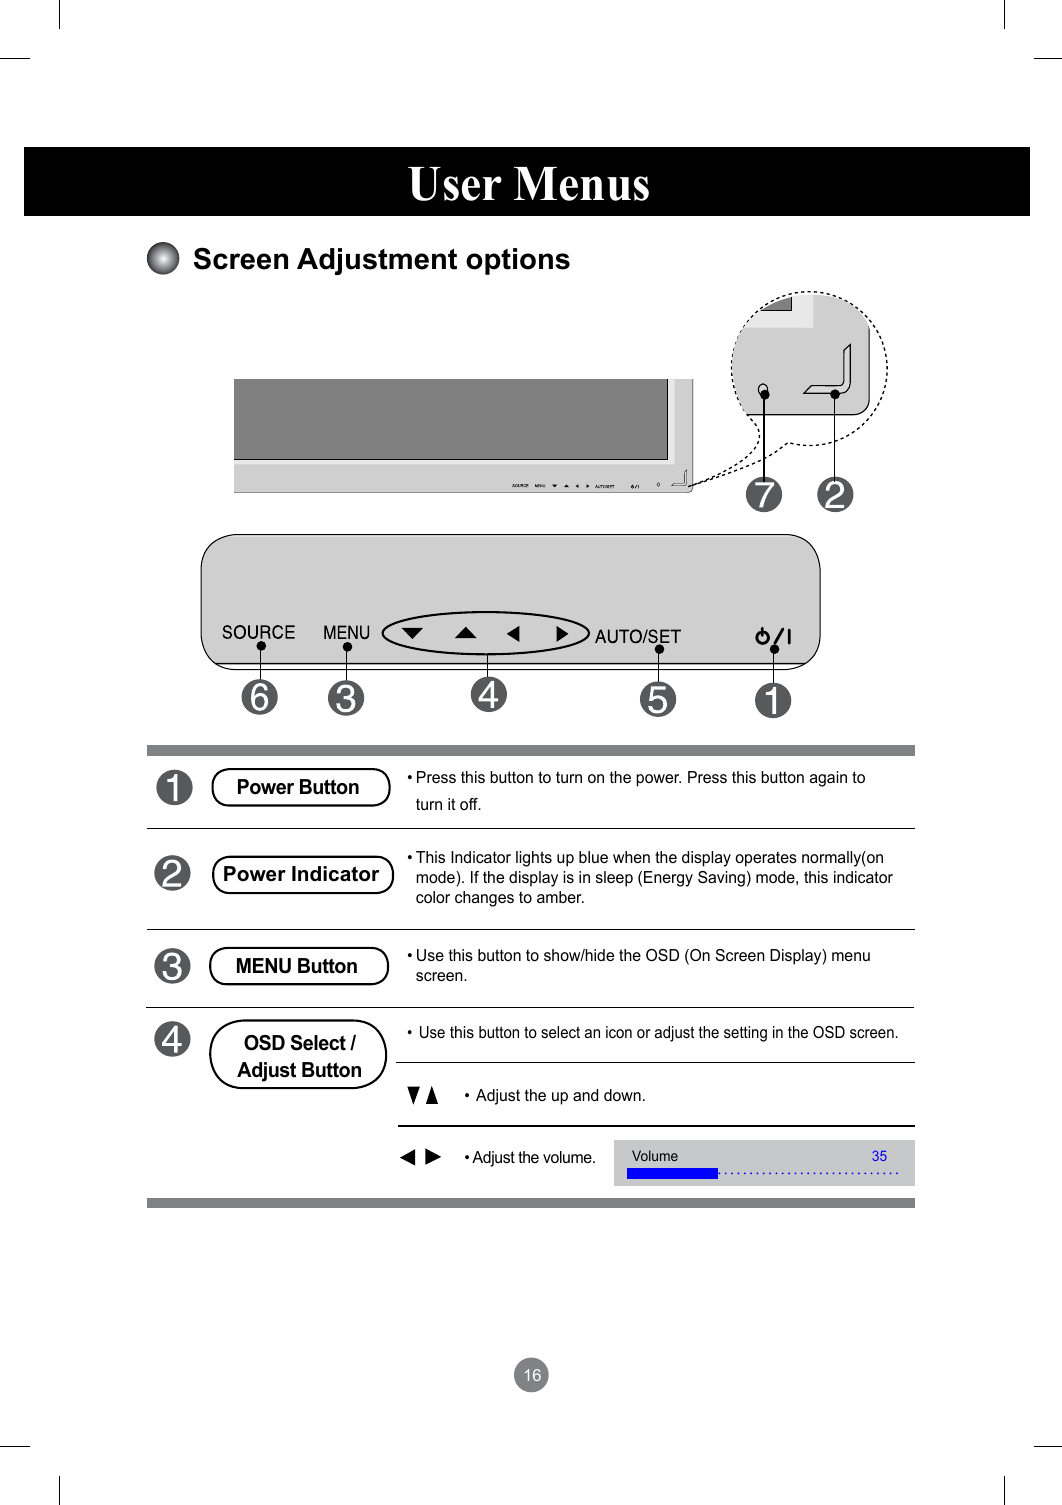 16User MenusScreen Adjustment options• Press this button to turn on the power. Press this button again to turn it off.• This Indicator lights up blue when the display operates normally(on mode). If the display is in sleep (Energy Saving) mode, this indicator color changes to amber.Power Button• Adjust the volume.• Adjust the up and down.• Use this button to show/hide the OSD (On Screen Display) menu screen.MENU Button•  Use this button to select an icon or adjust the setting in the OSD screen.OSD Select /Adjust ButtonPower IndicatorVolume 35